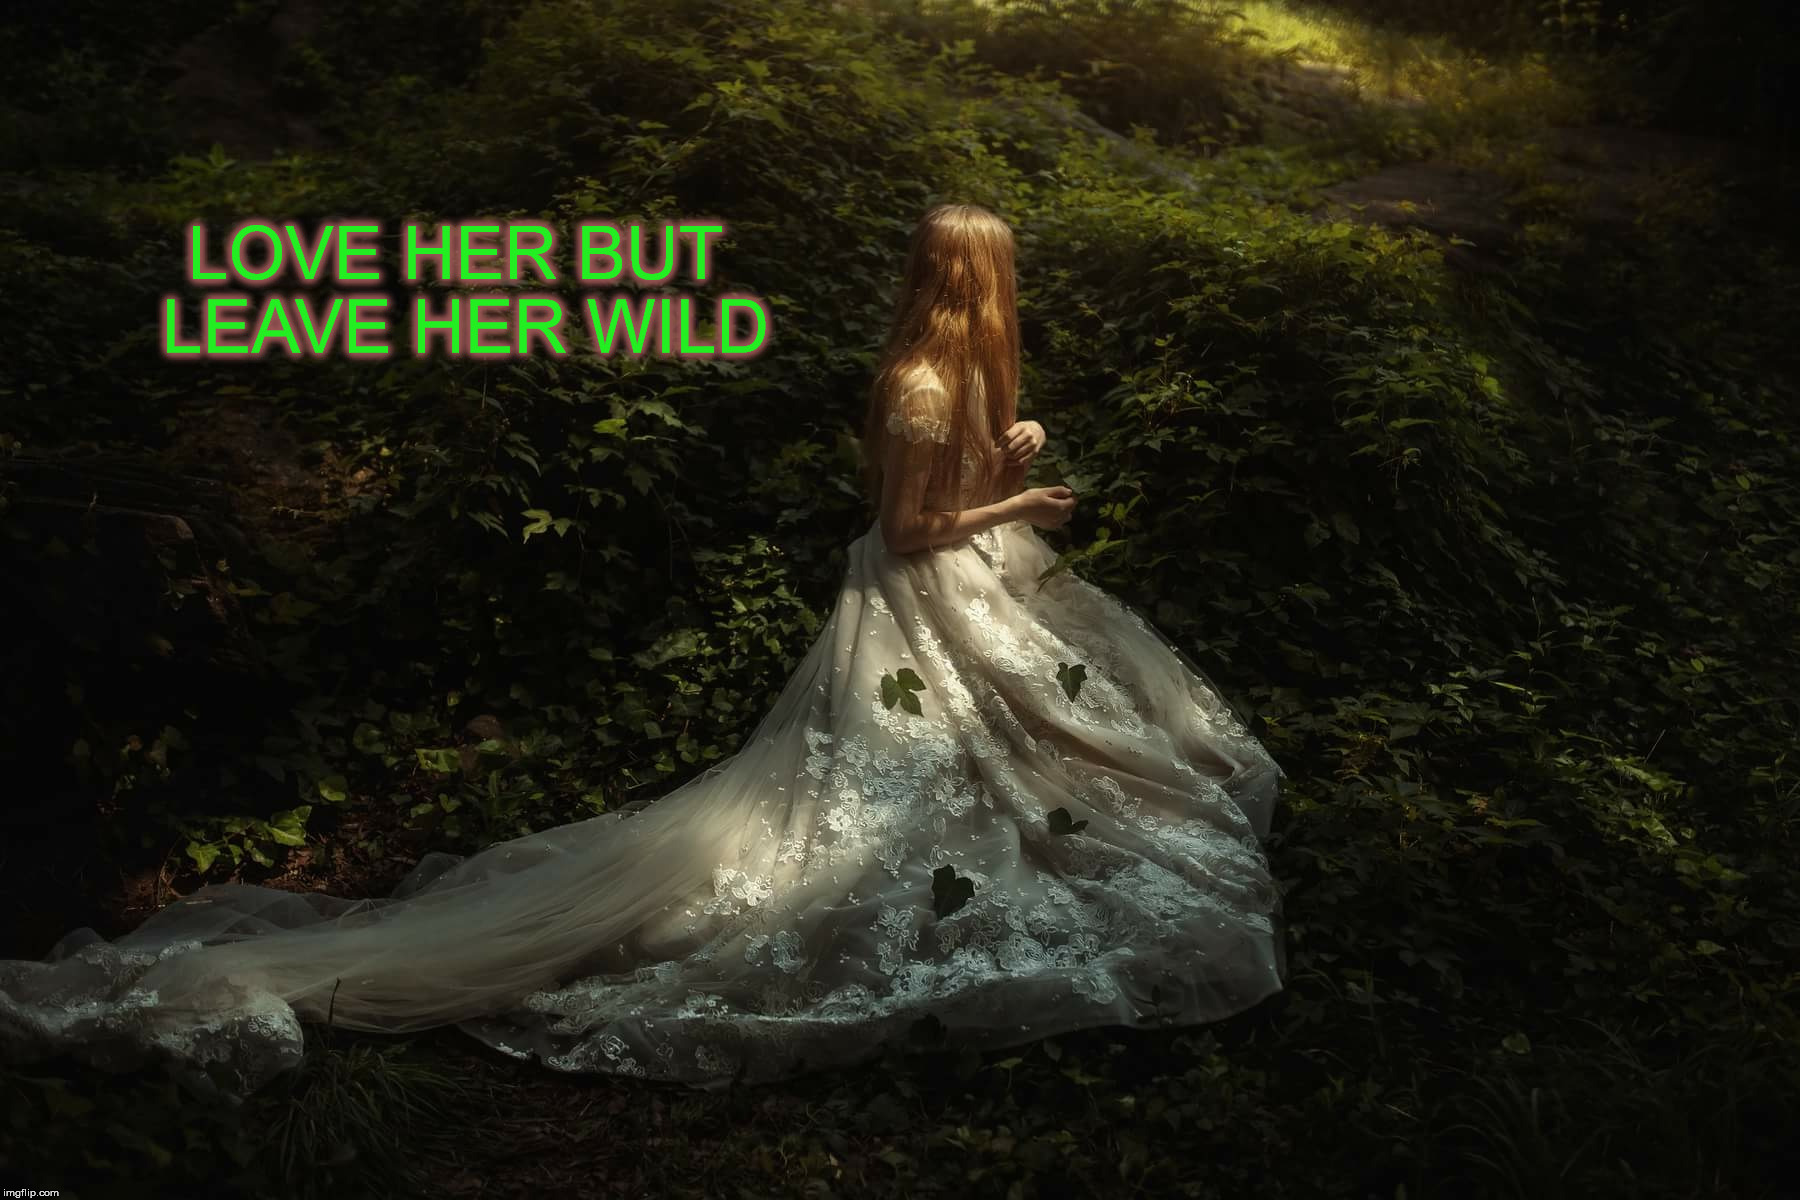 LOVE HER BUT LEAVE HER WILD | image tagged in nature | made w/ Imgflip meme maker